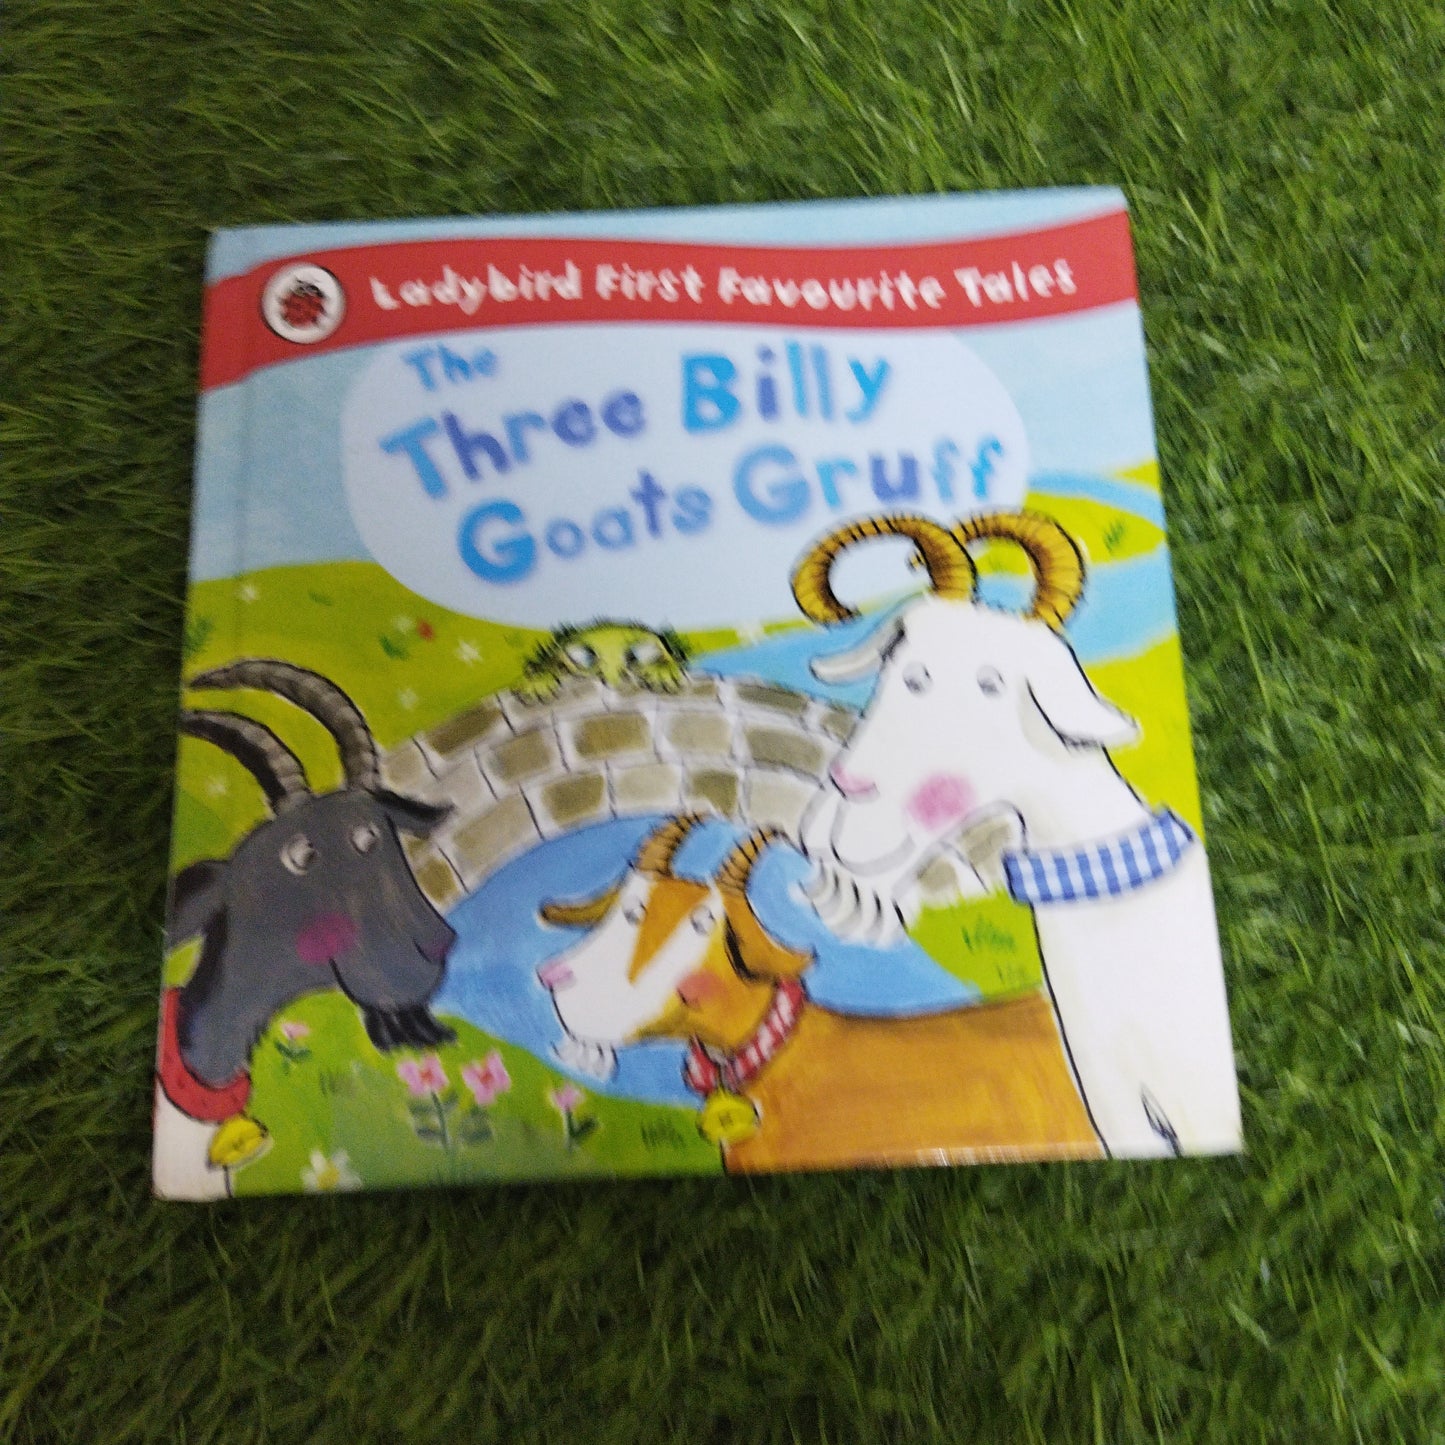 Ladybird first Favourite Tales The Three Billy Goats Gruff